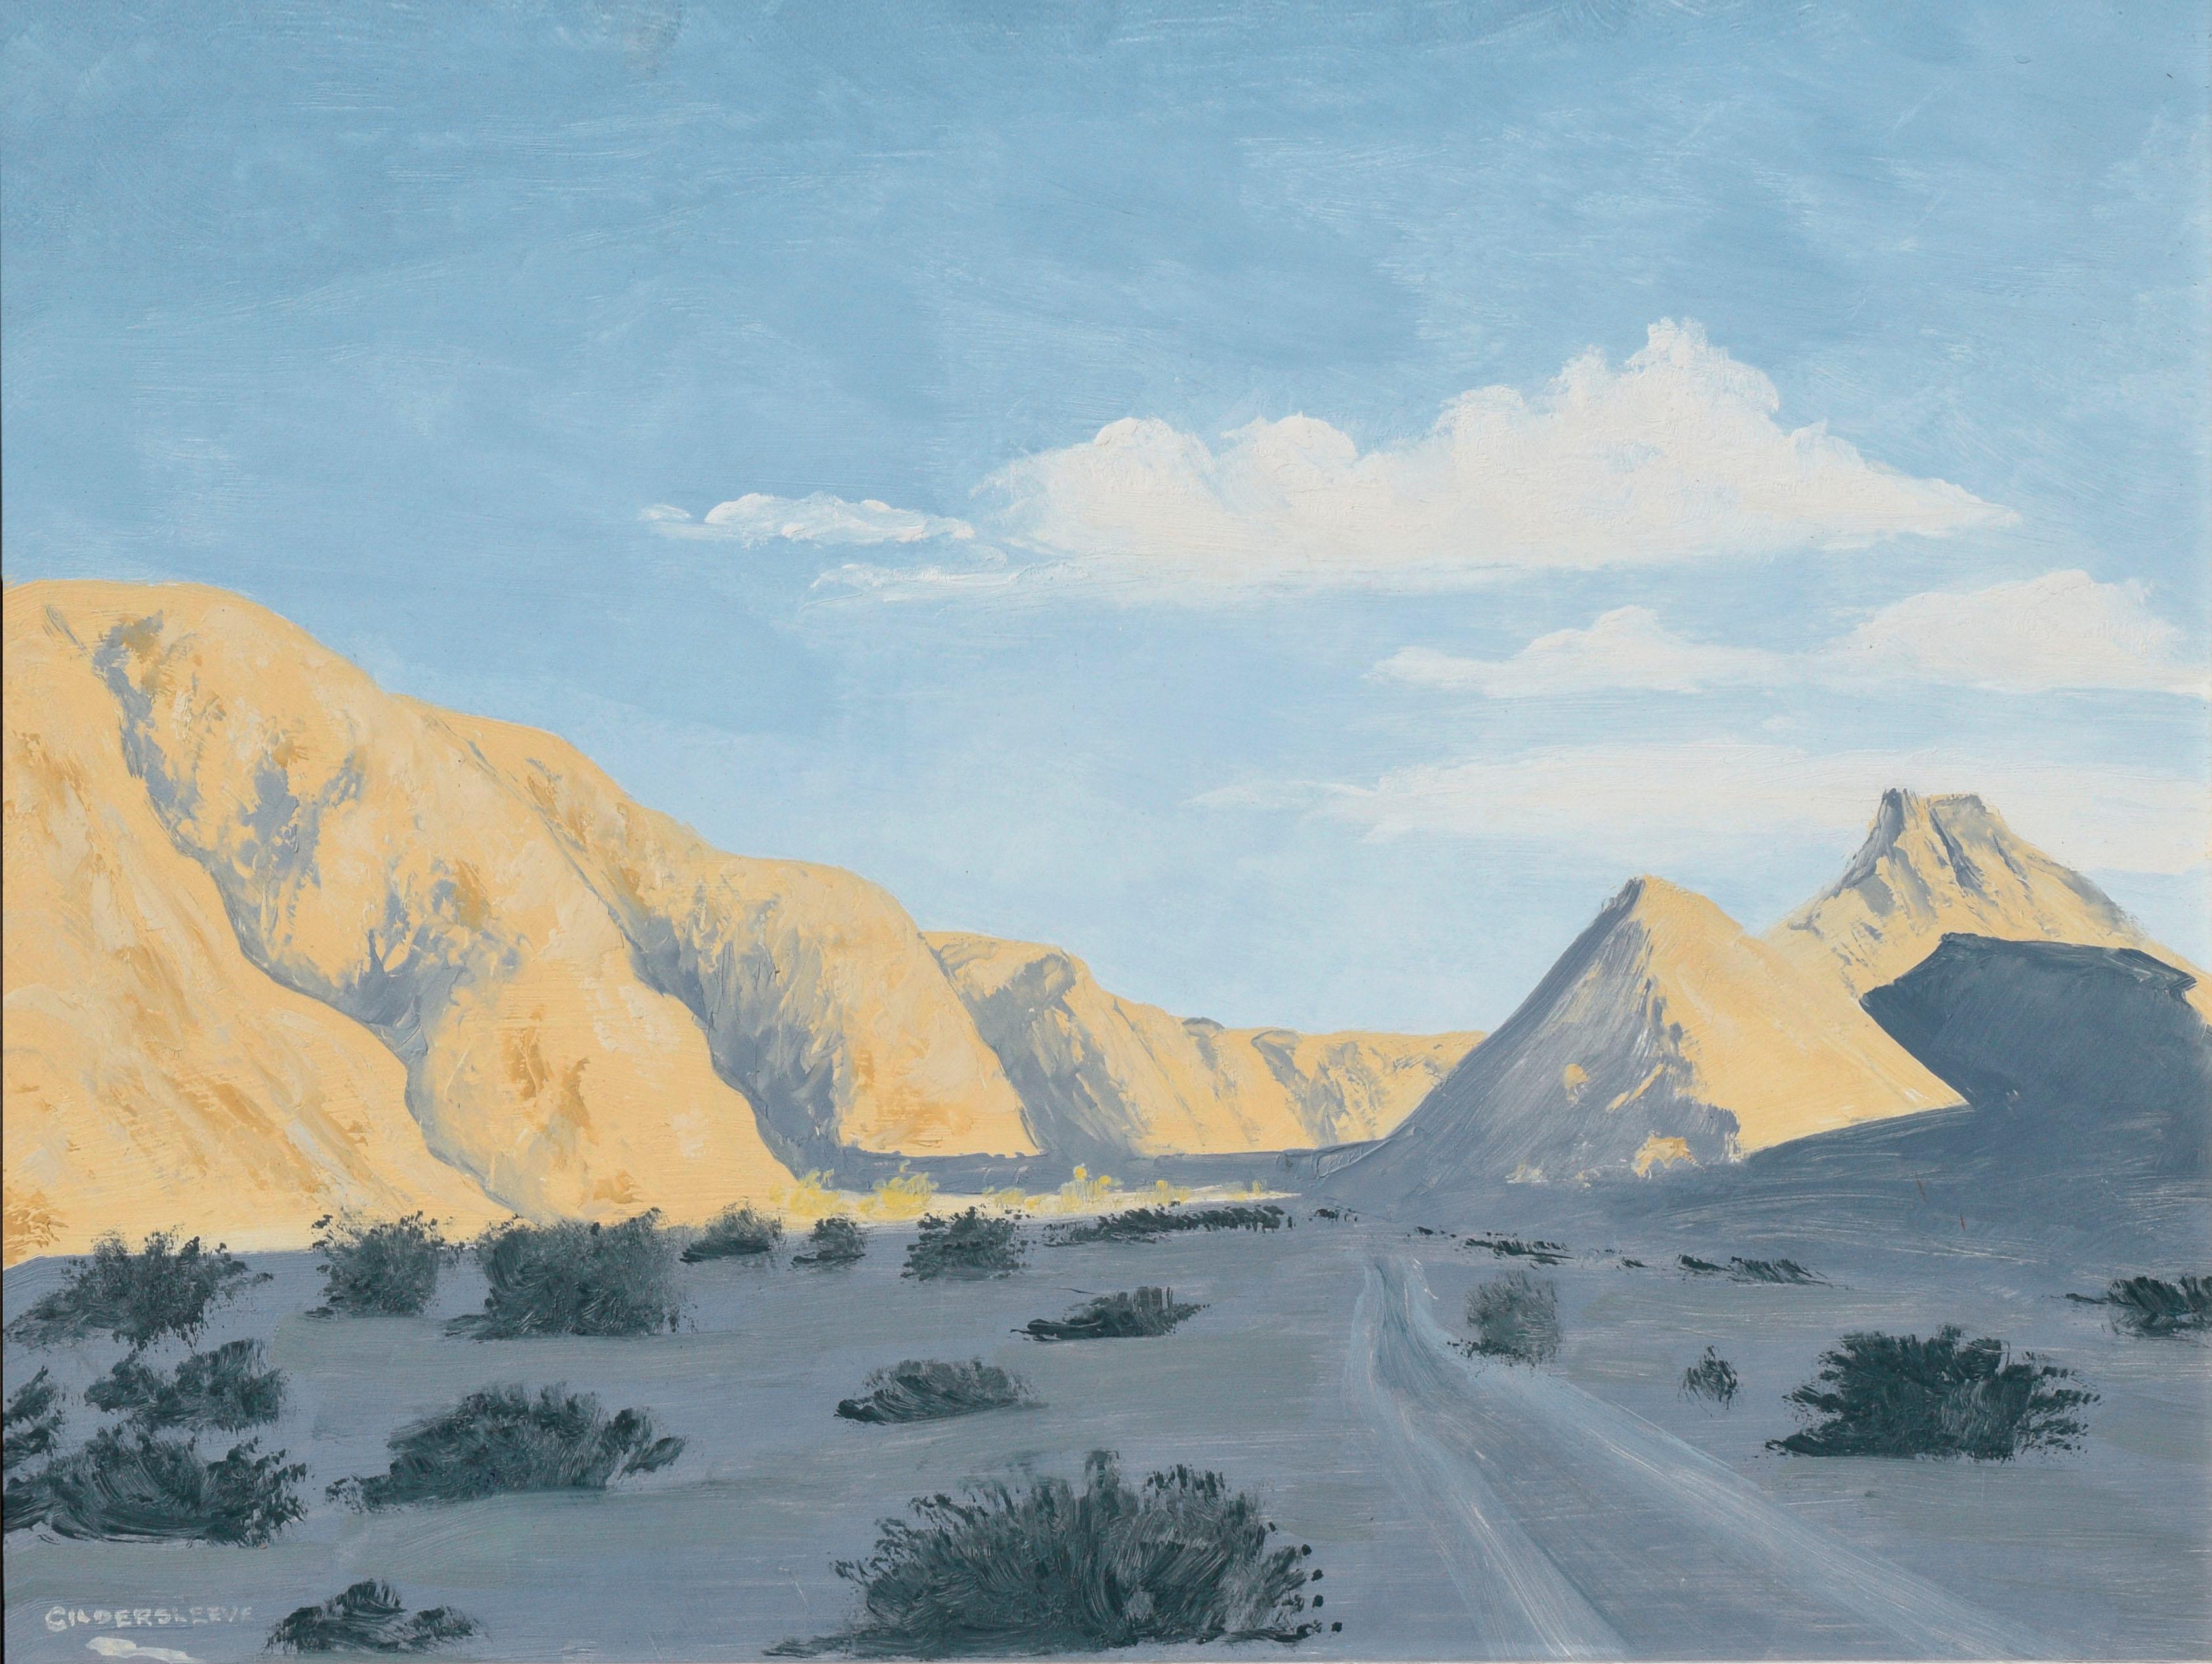 Early 20th Century Road Through the Desert Landscape - Painting by Beatrice Gerberding Gildersleeve